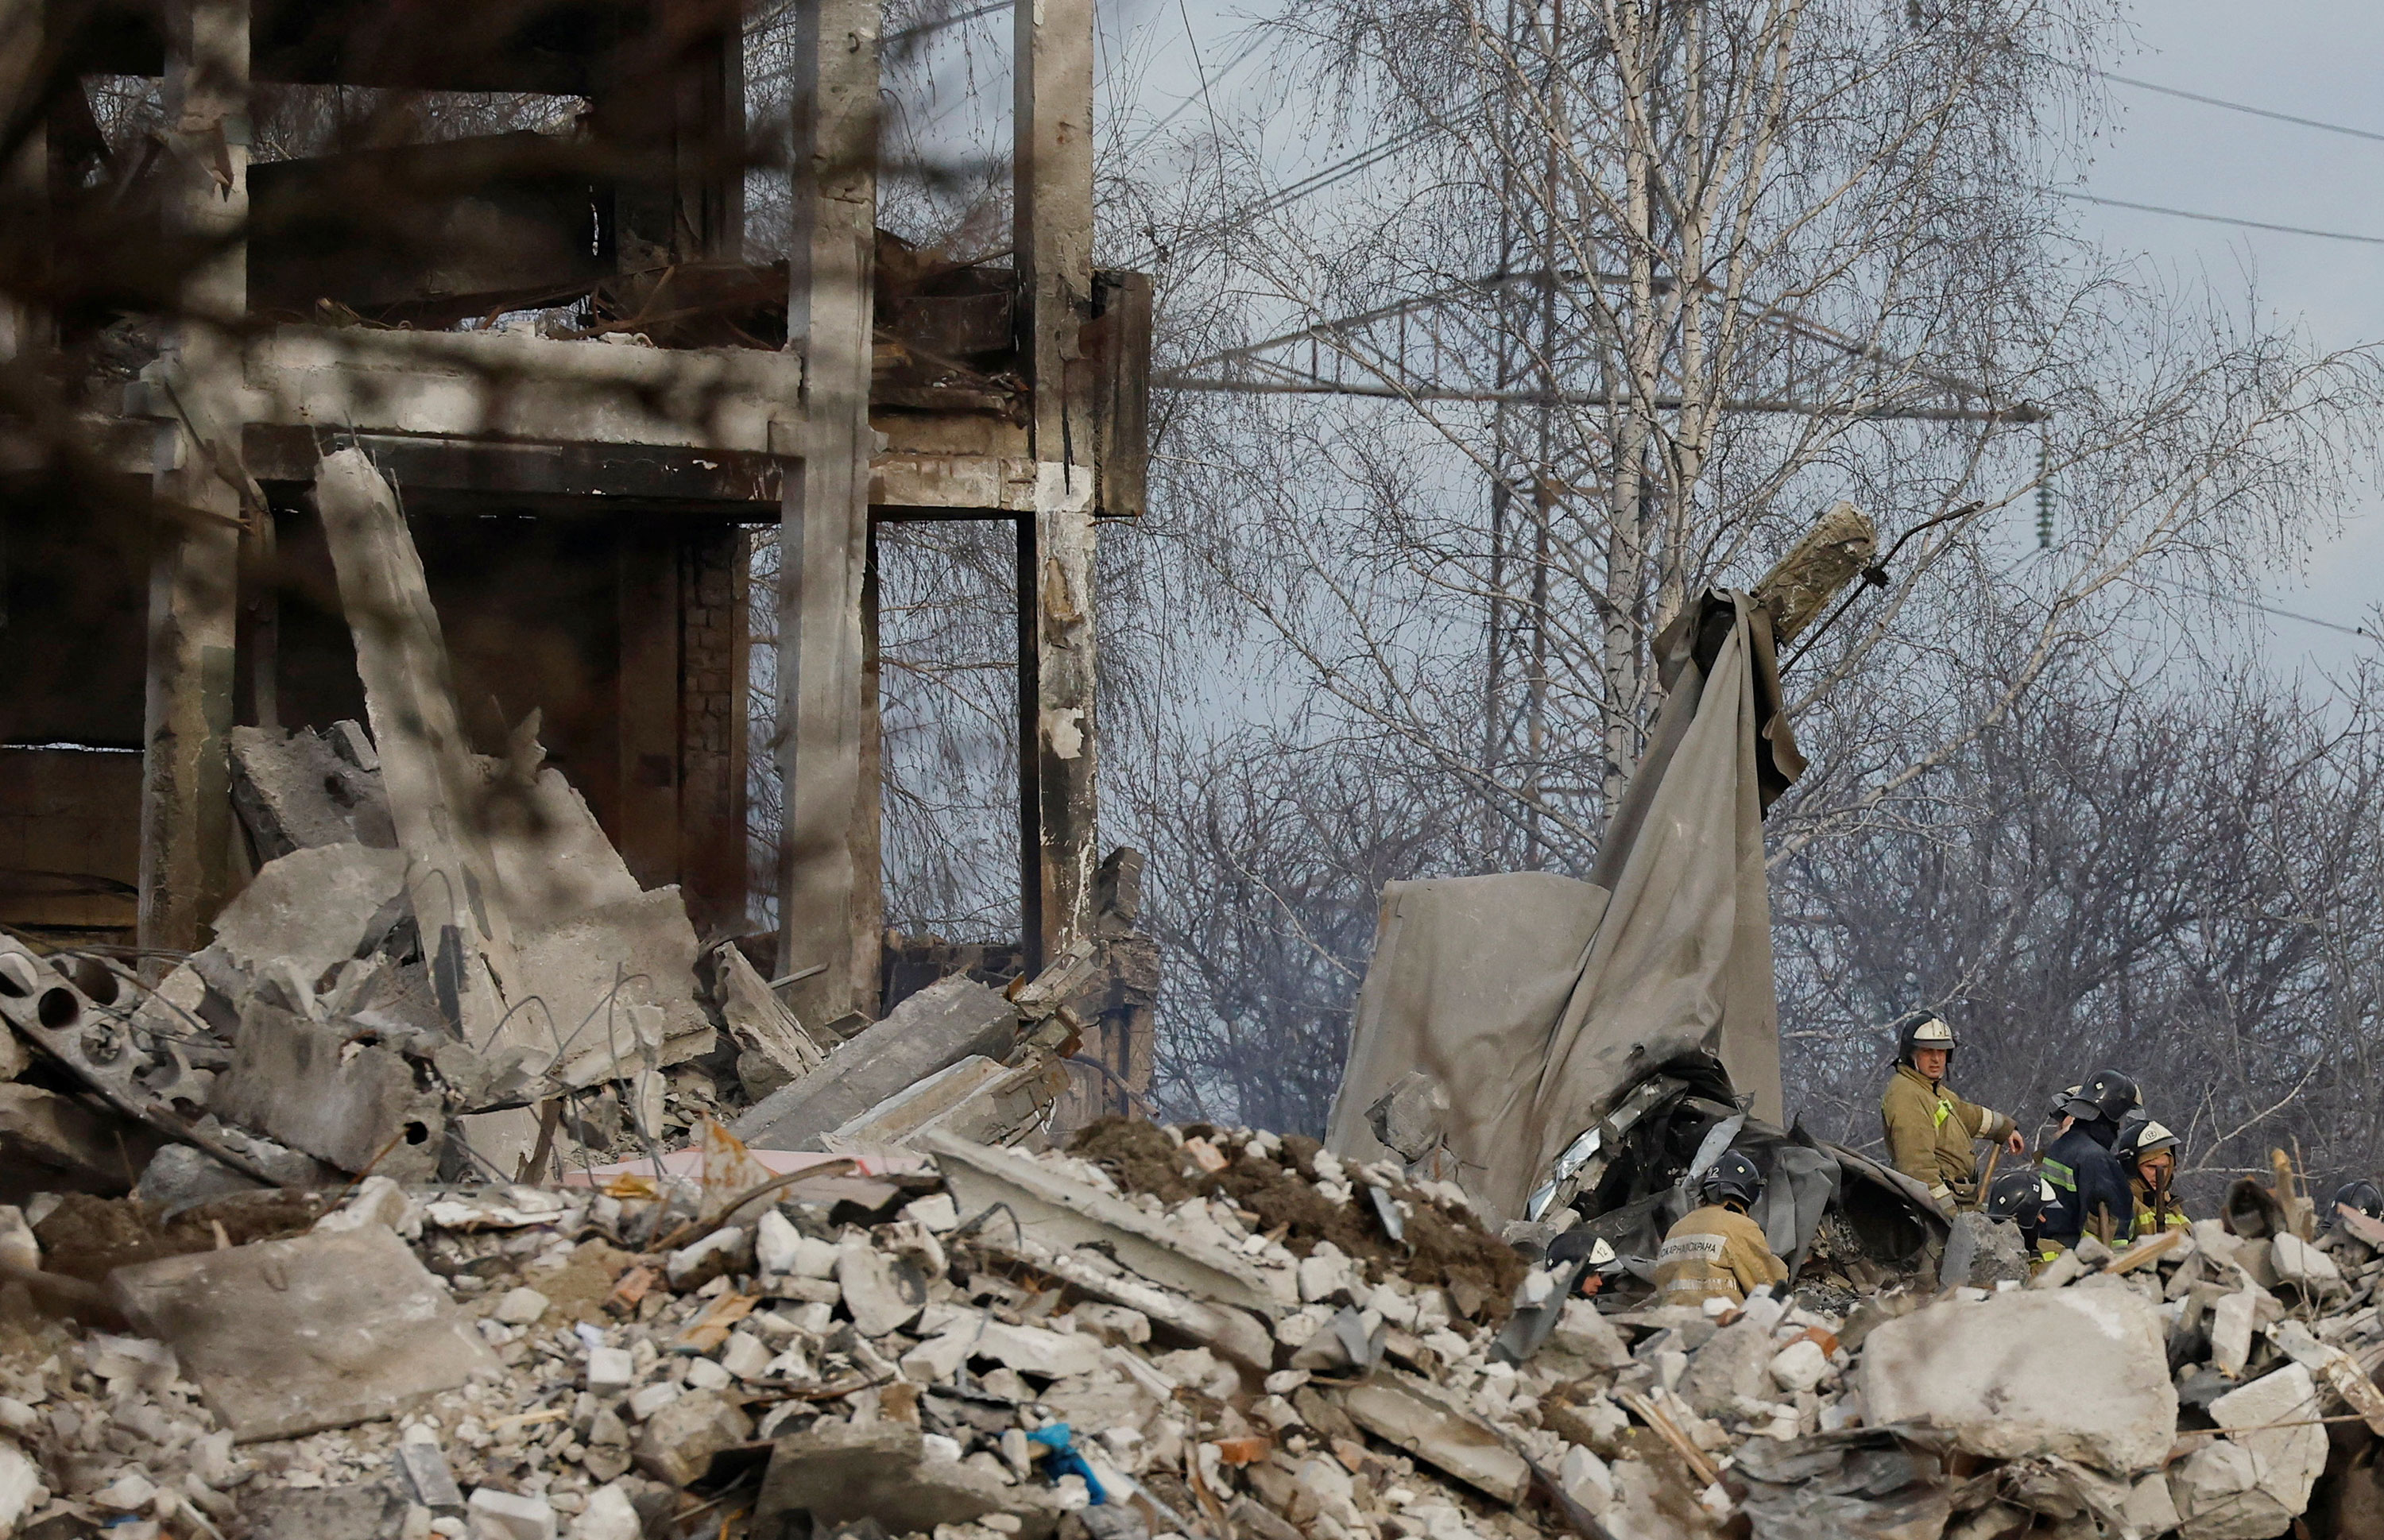 Workers remove debris of a destroyed building purported to be a vocational college used as temporary accommodation for Russian soldiers in Makiivka, Russian-controlled Ukraine on Wednesday.